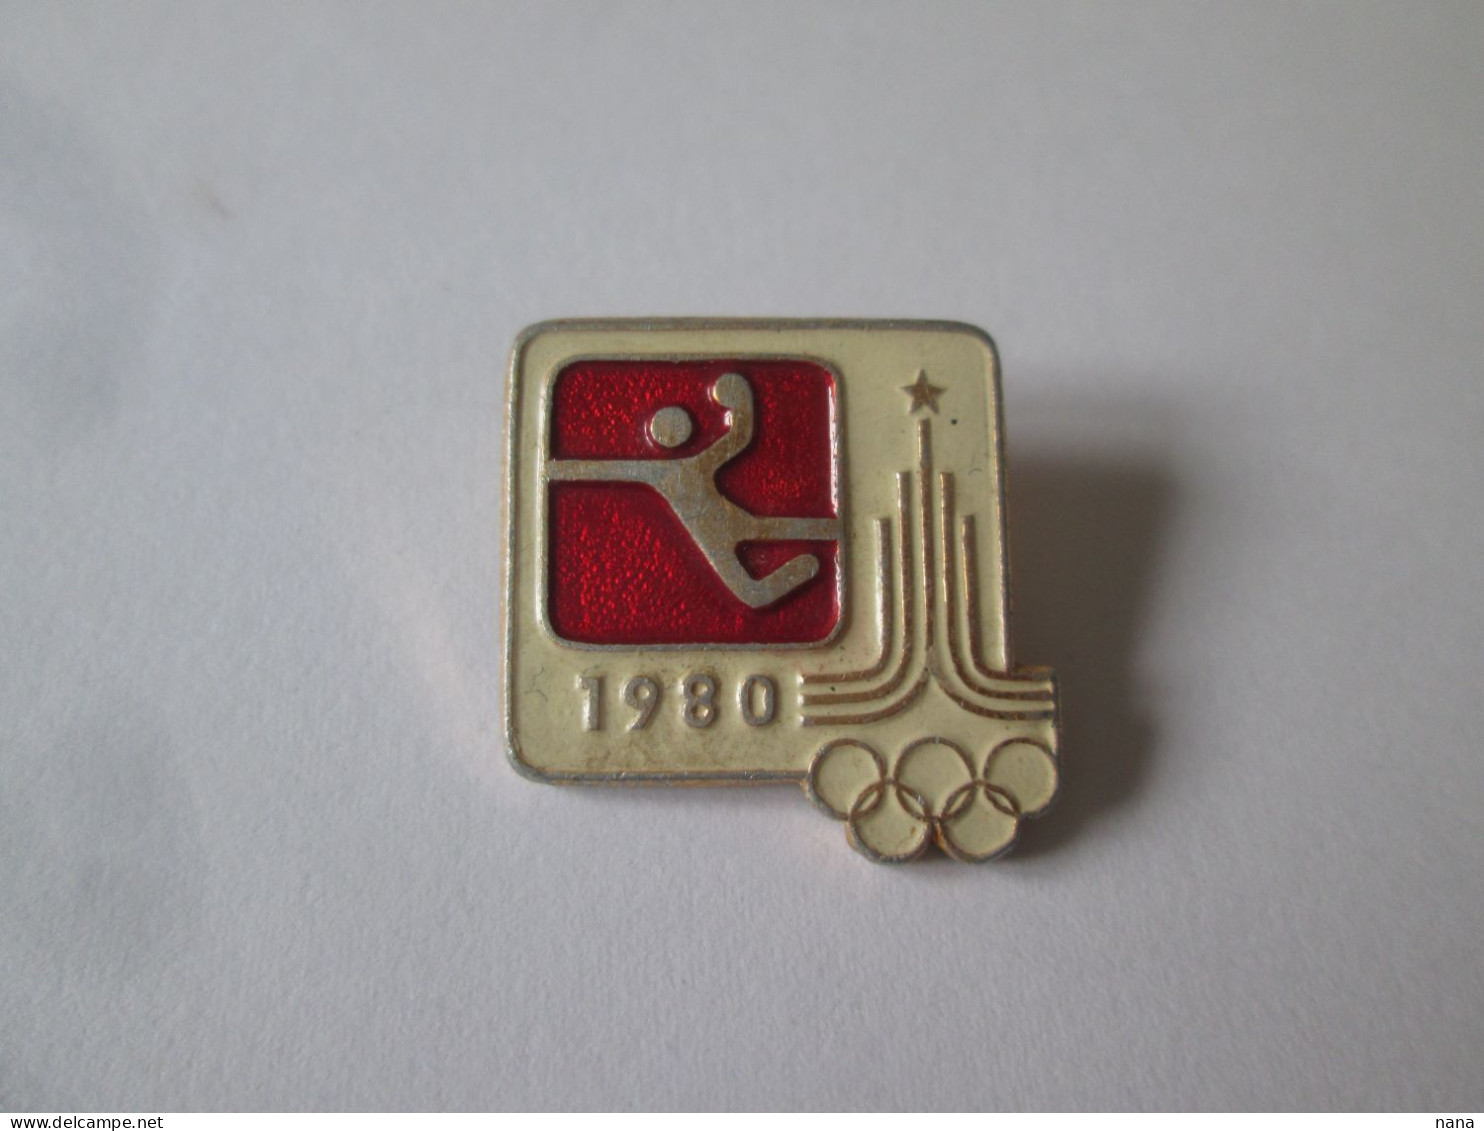 Insigne Russe Jeux Olympiques De Moscou 1980/Russian Badge Moscow Olympic Games 1980,size=22 X 22 Mm - Olympic Games